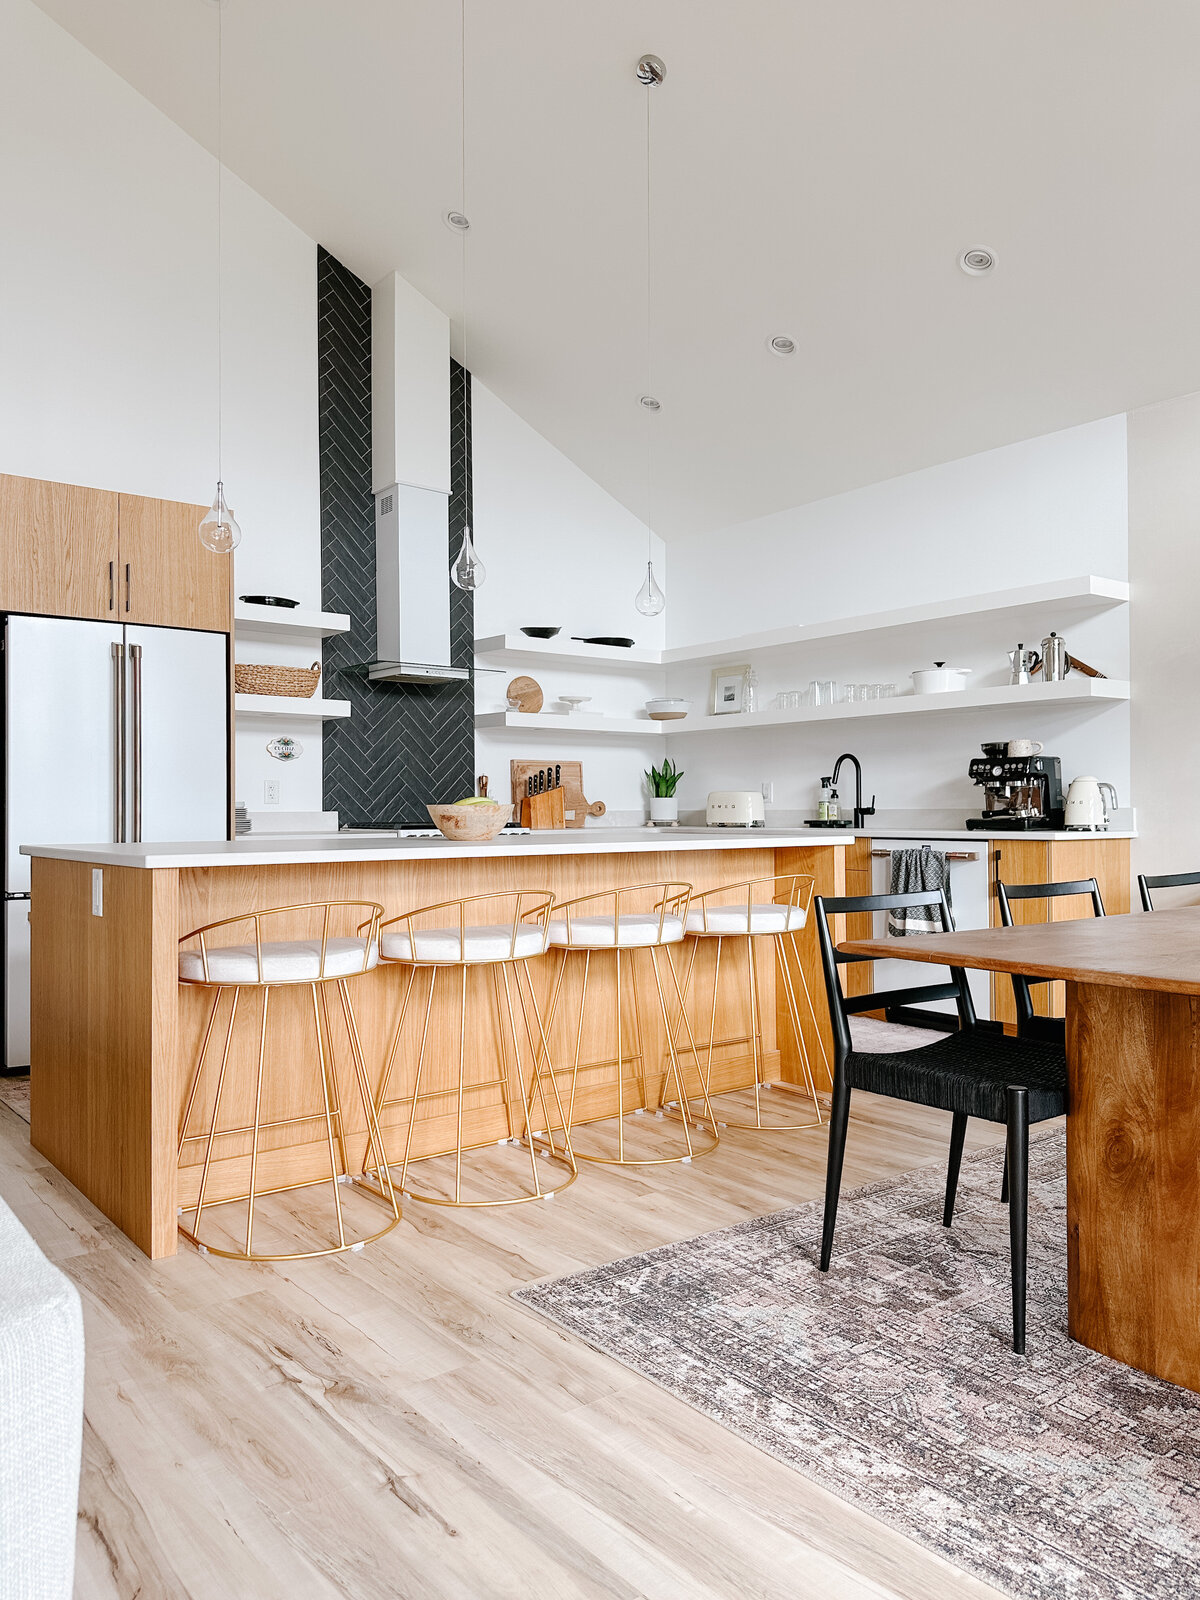 Open concept Scandinavian kitchen design with open shelving and cafe appliances.